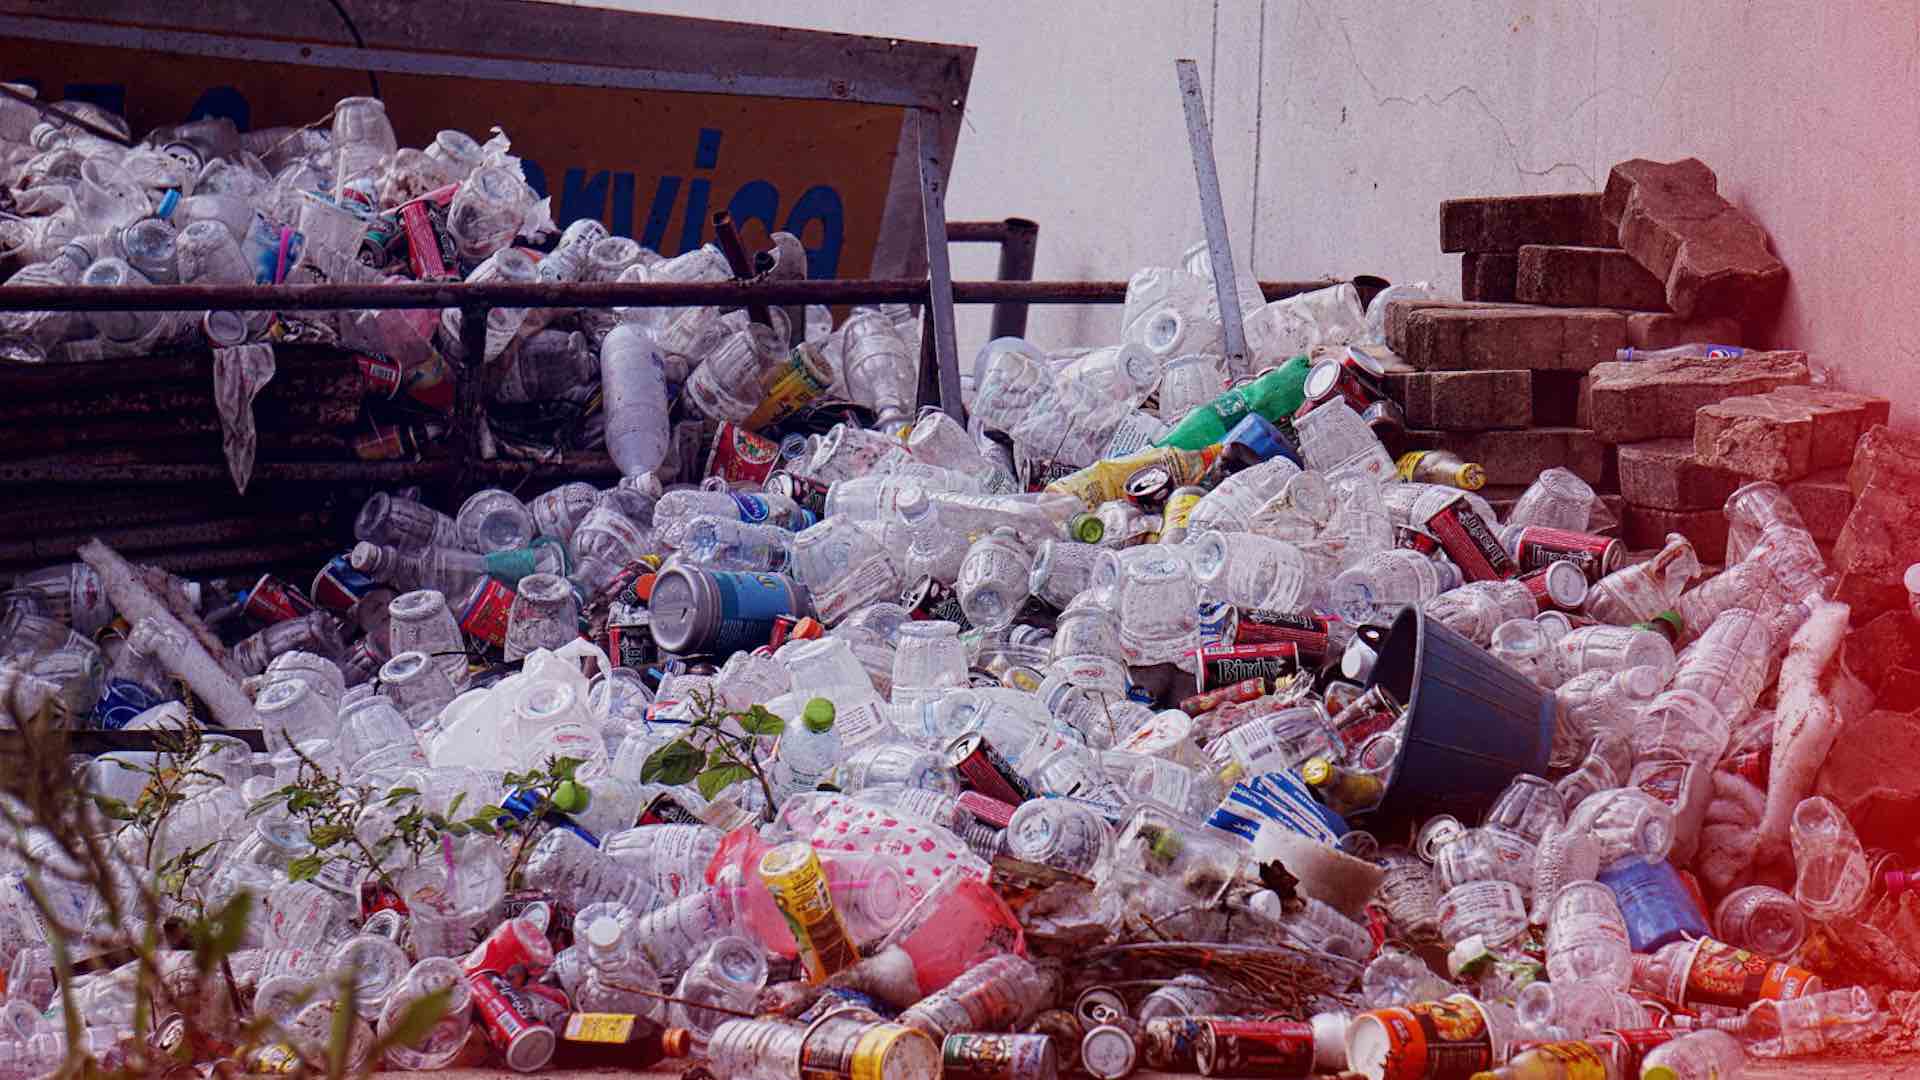 EU provisionally agrees on law to combat packaging waste